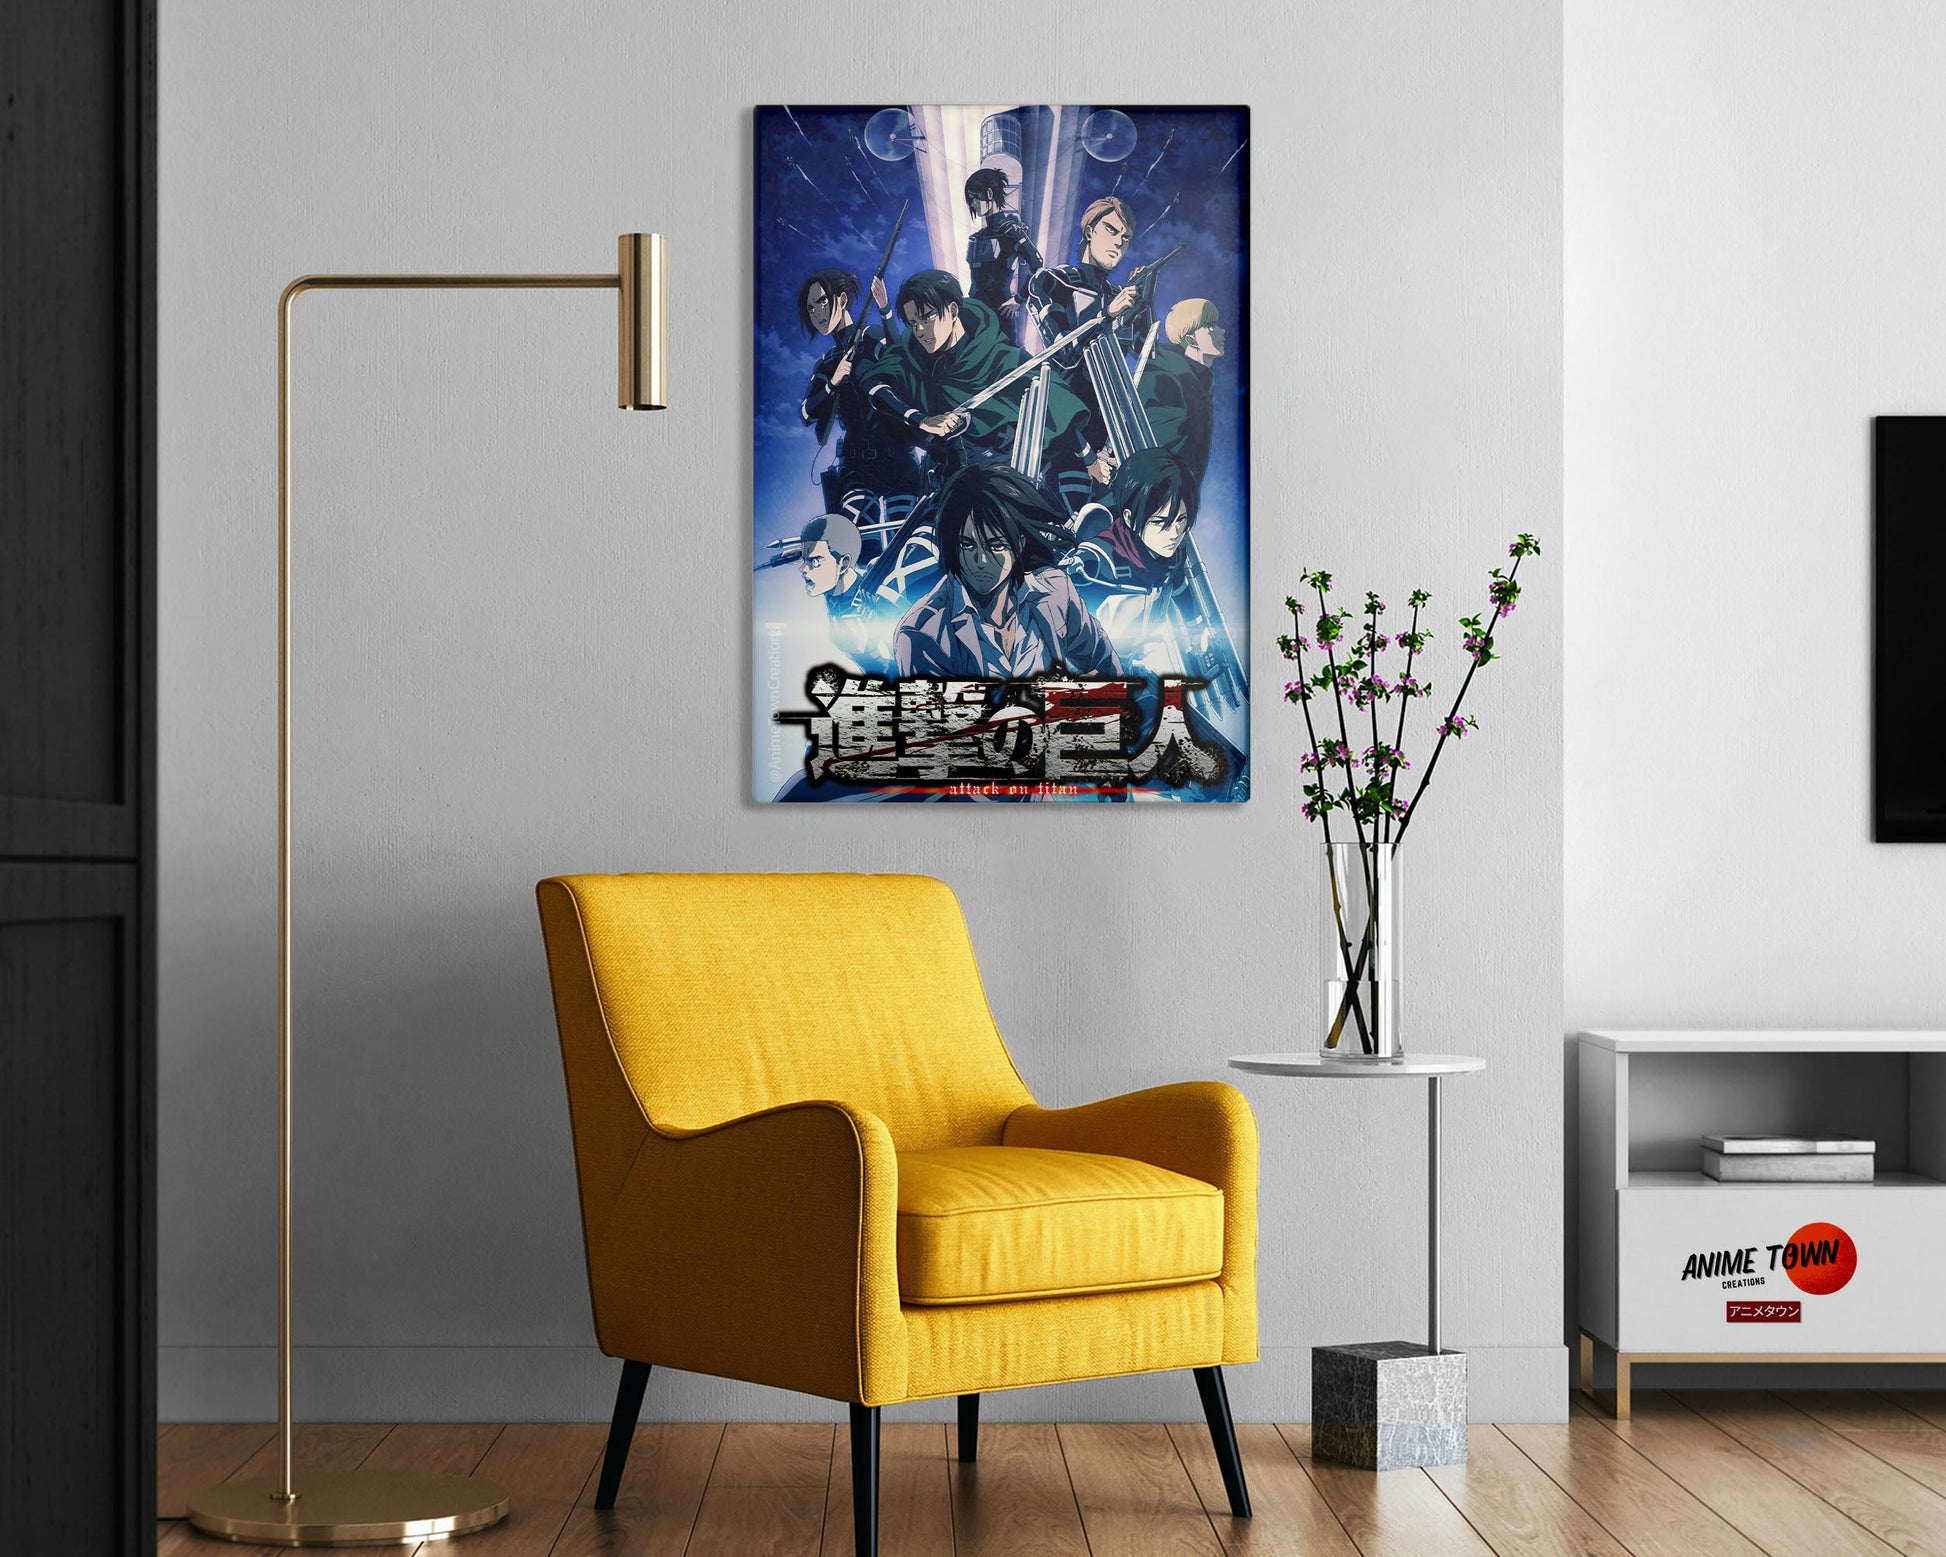 Anime Town Creations Metal Poster Attack on Titan The Final Season 24" x 36" Home Goods - Anime Attack on Titan Metal Poster